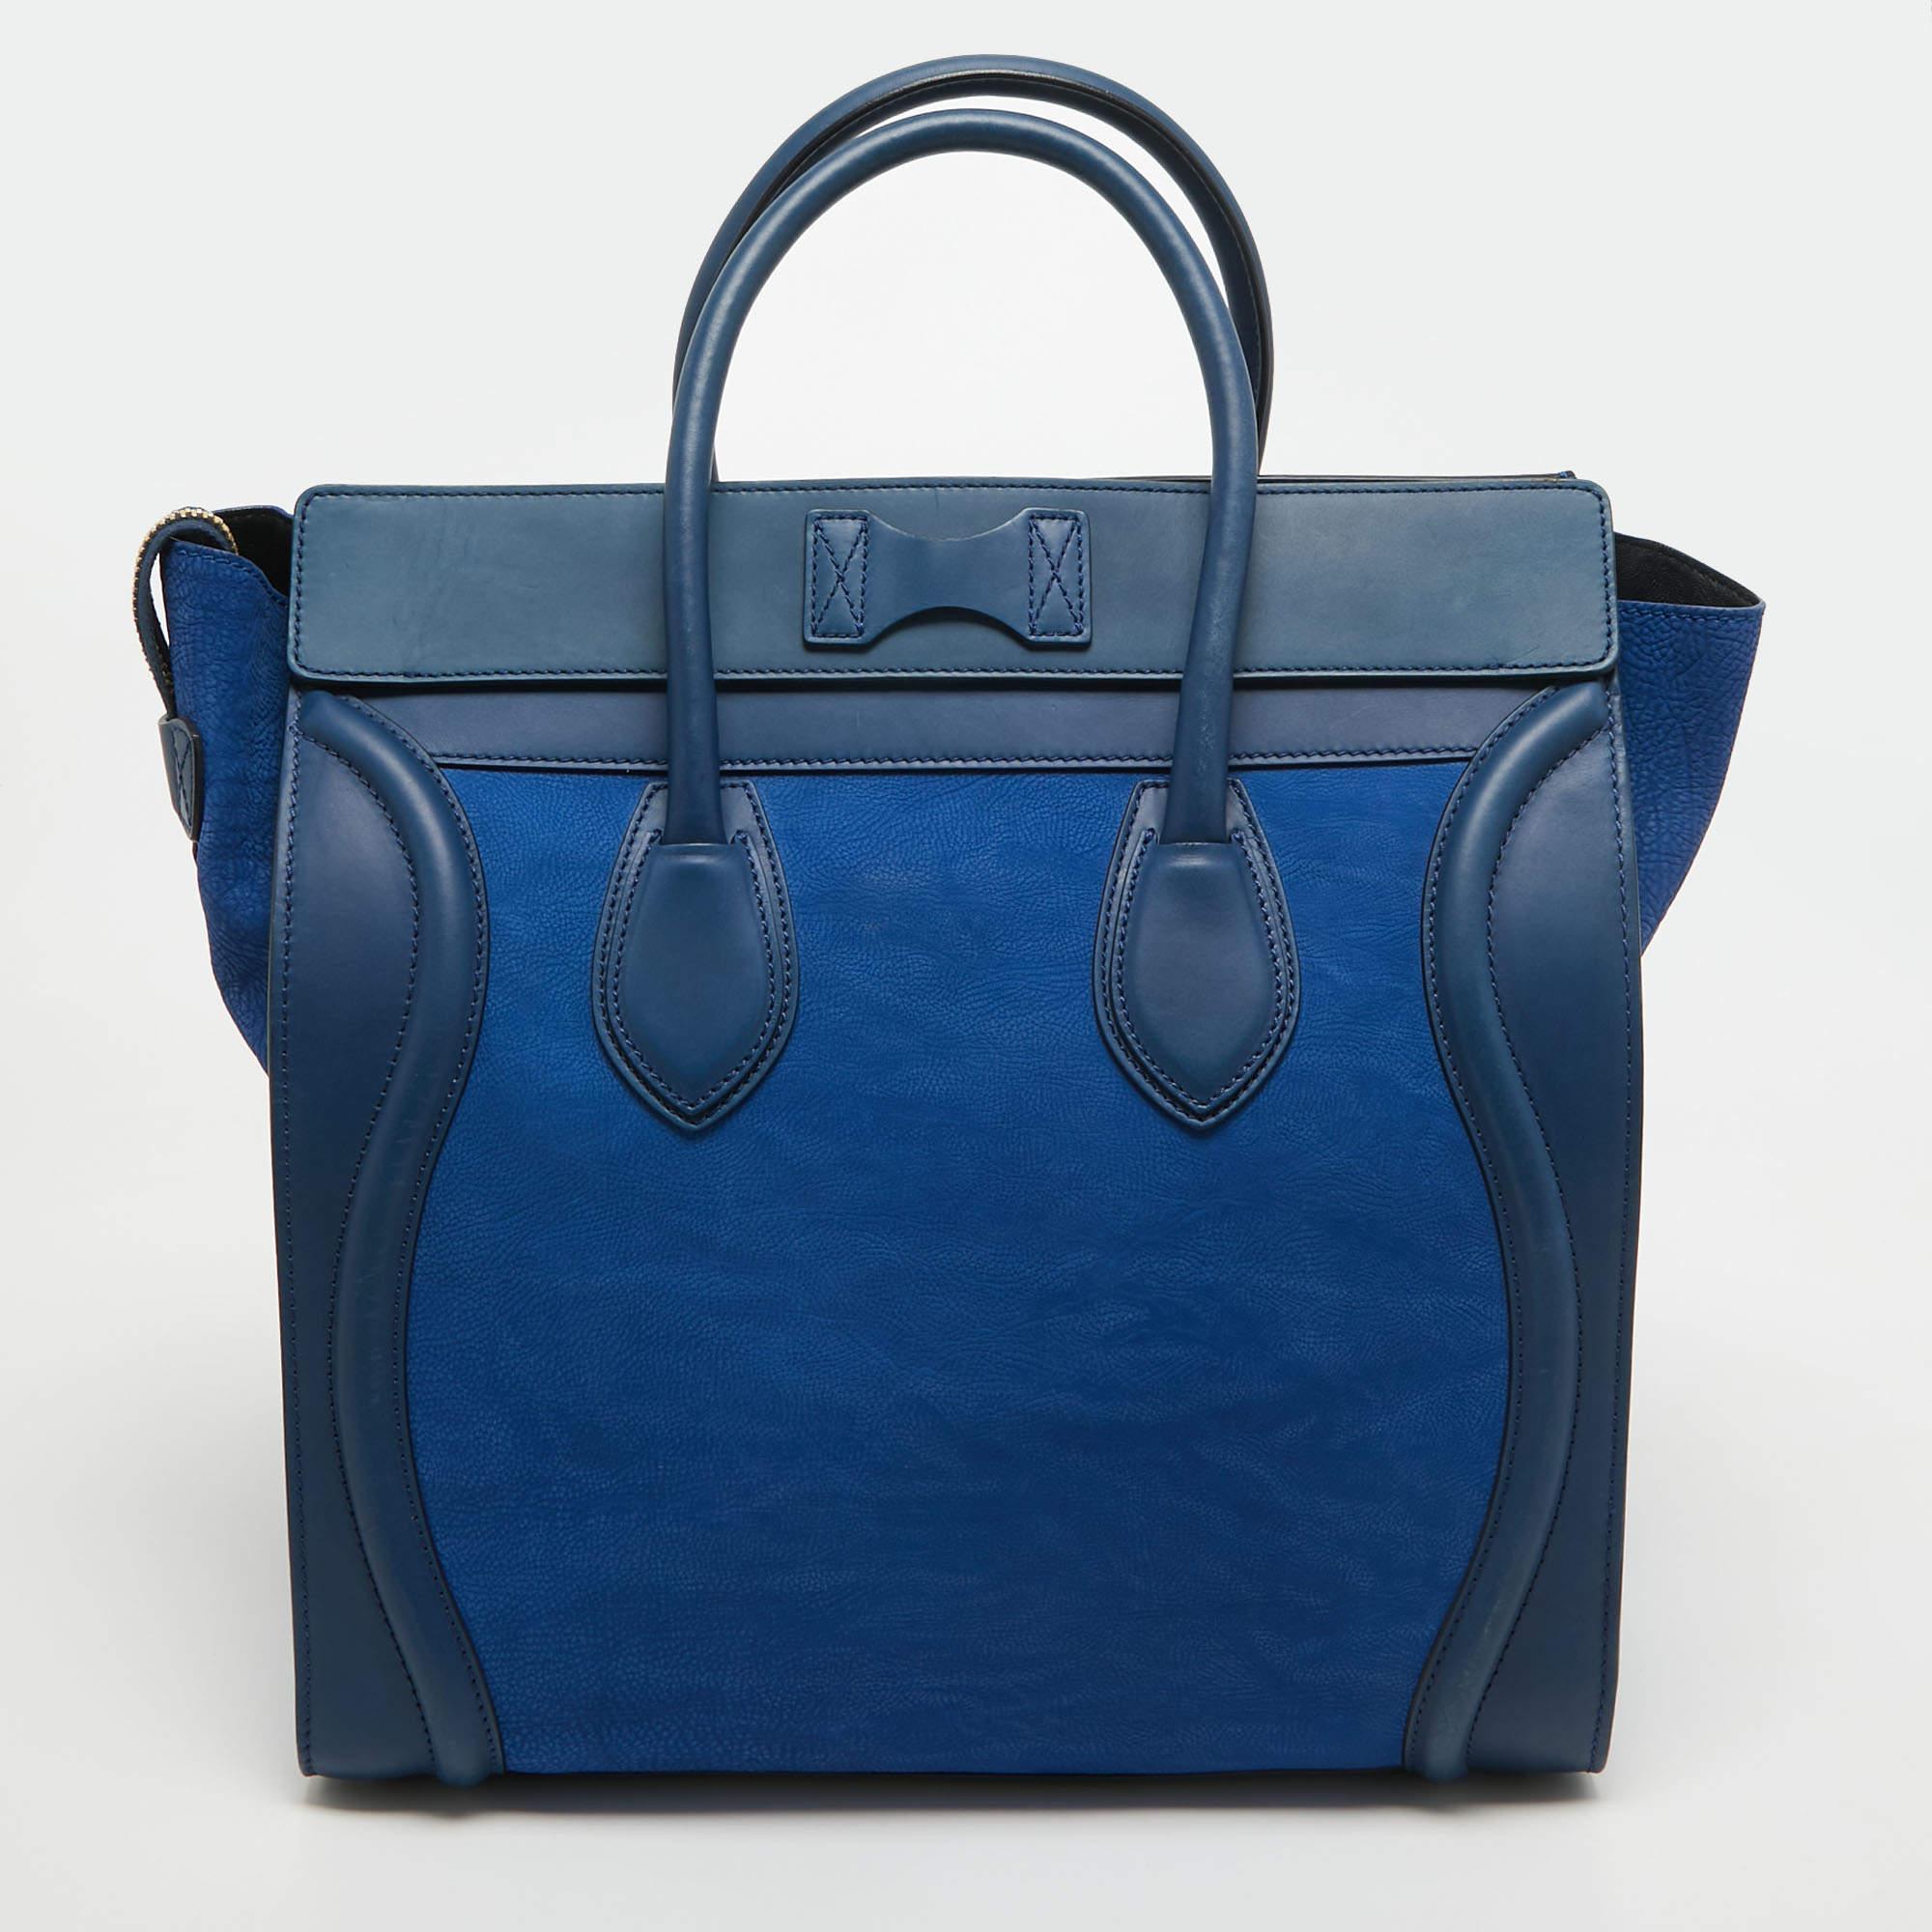 Celine Two Tone Blue Leather and Nubuck Medium Luggage Tote For Sale 2